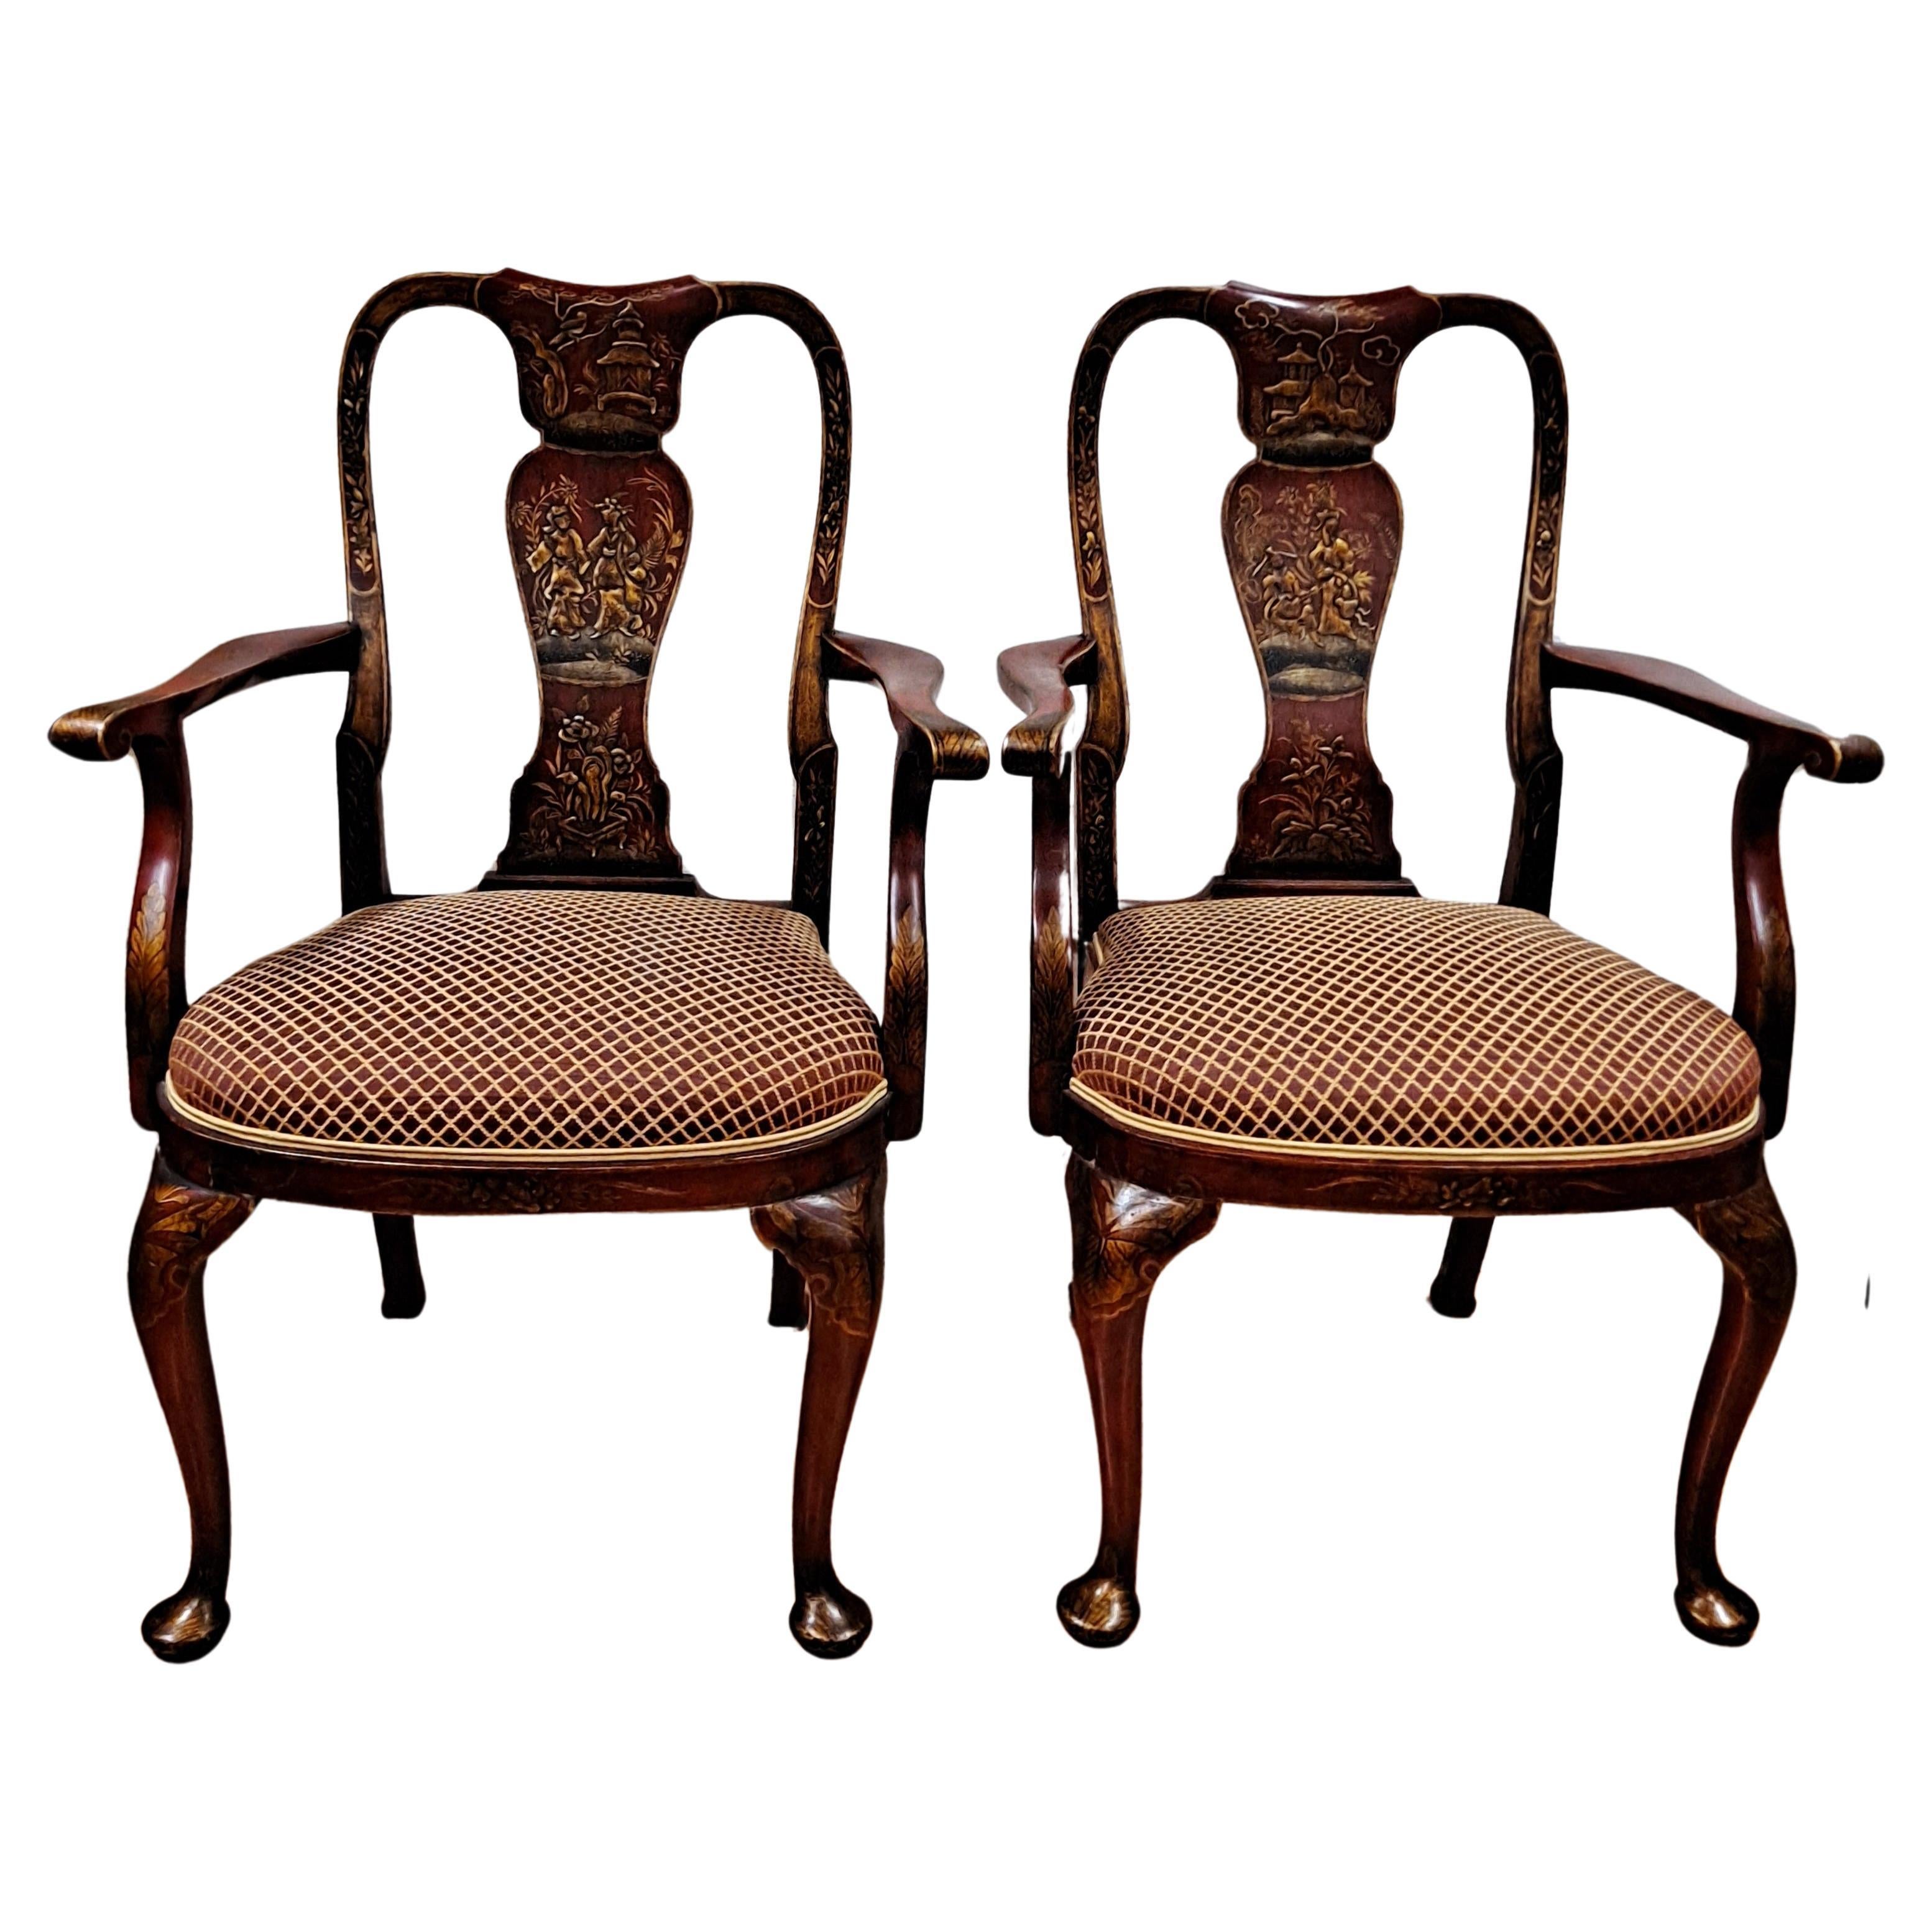 Pair of Queen Anne-Style Chinoiserie Painted Armchairs With Upholstered Seats